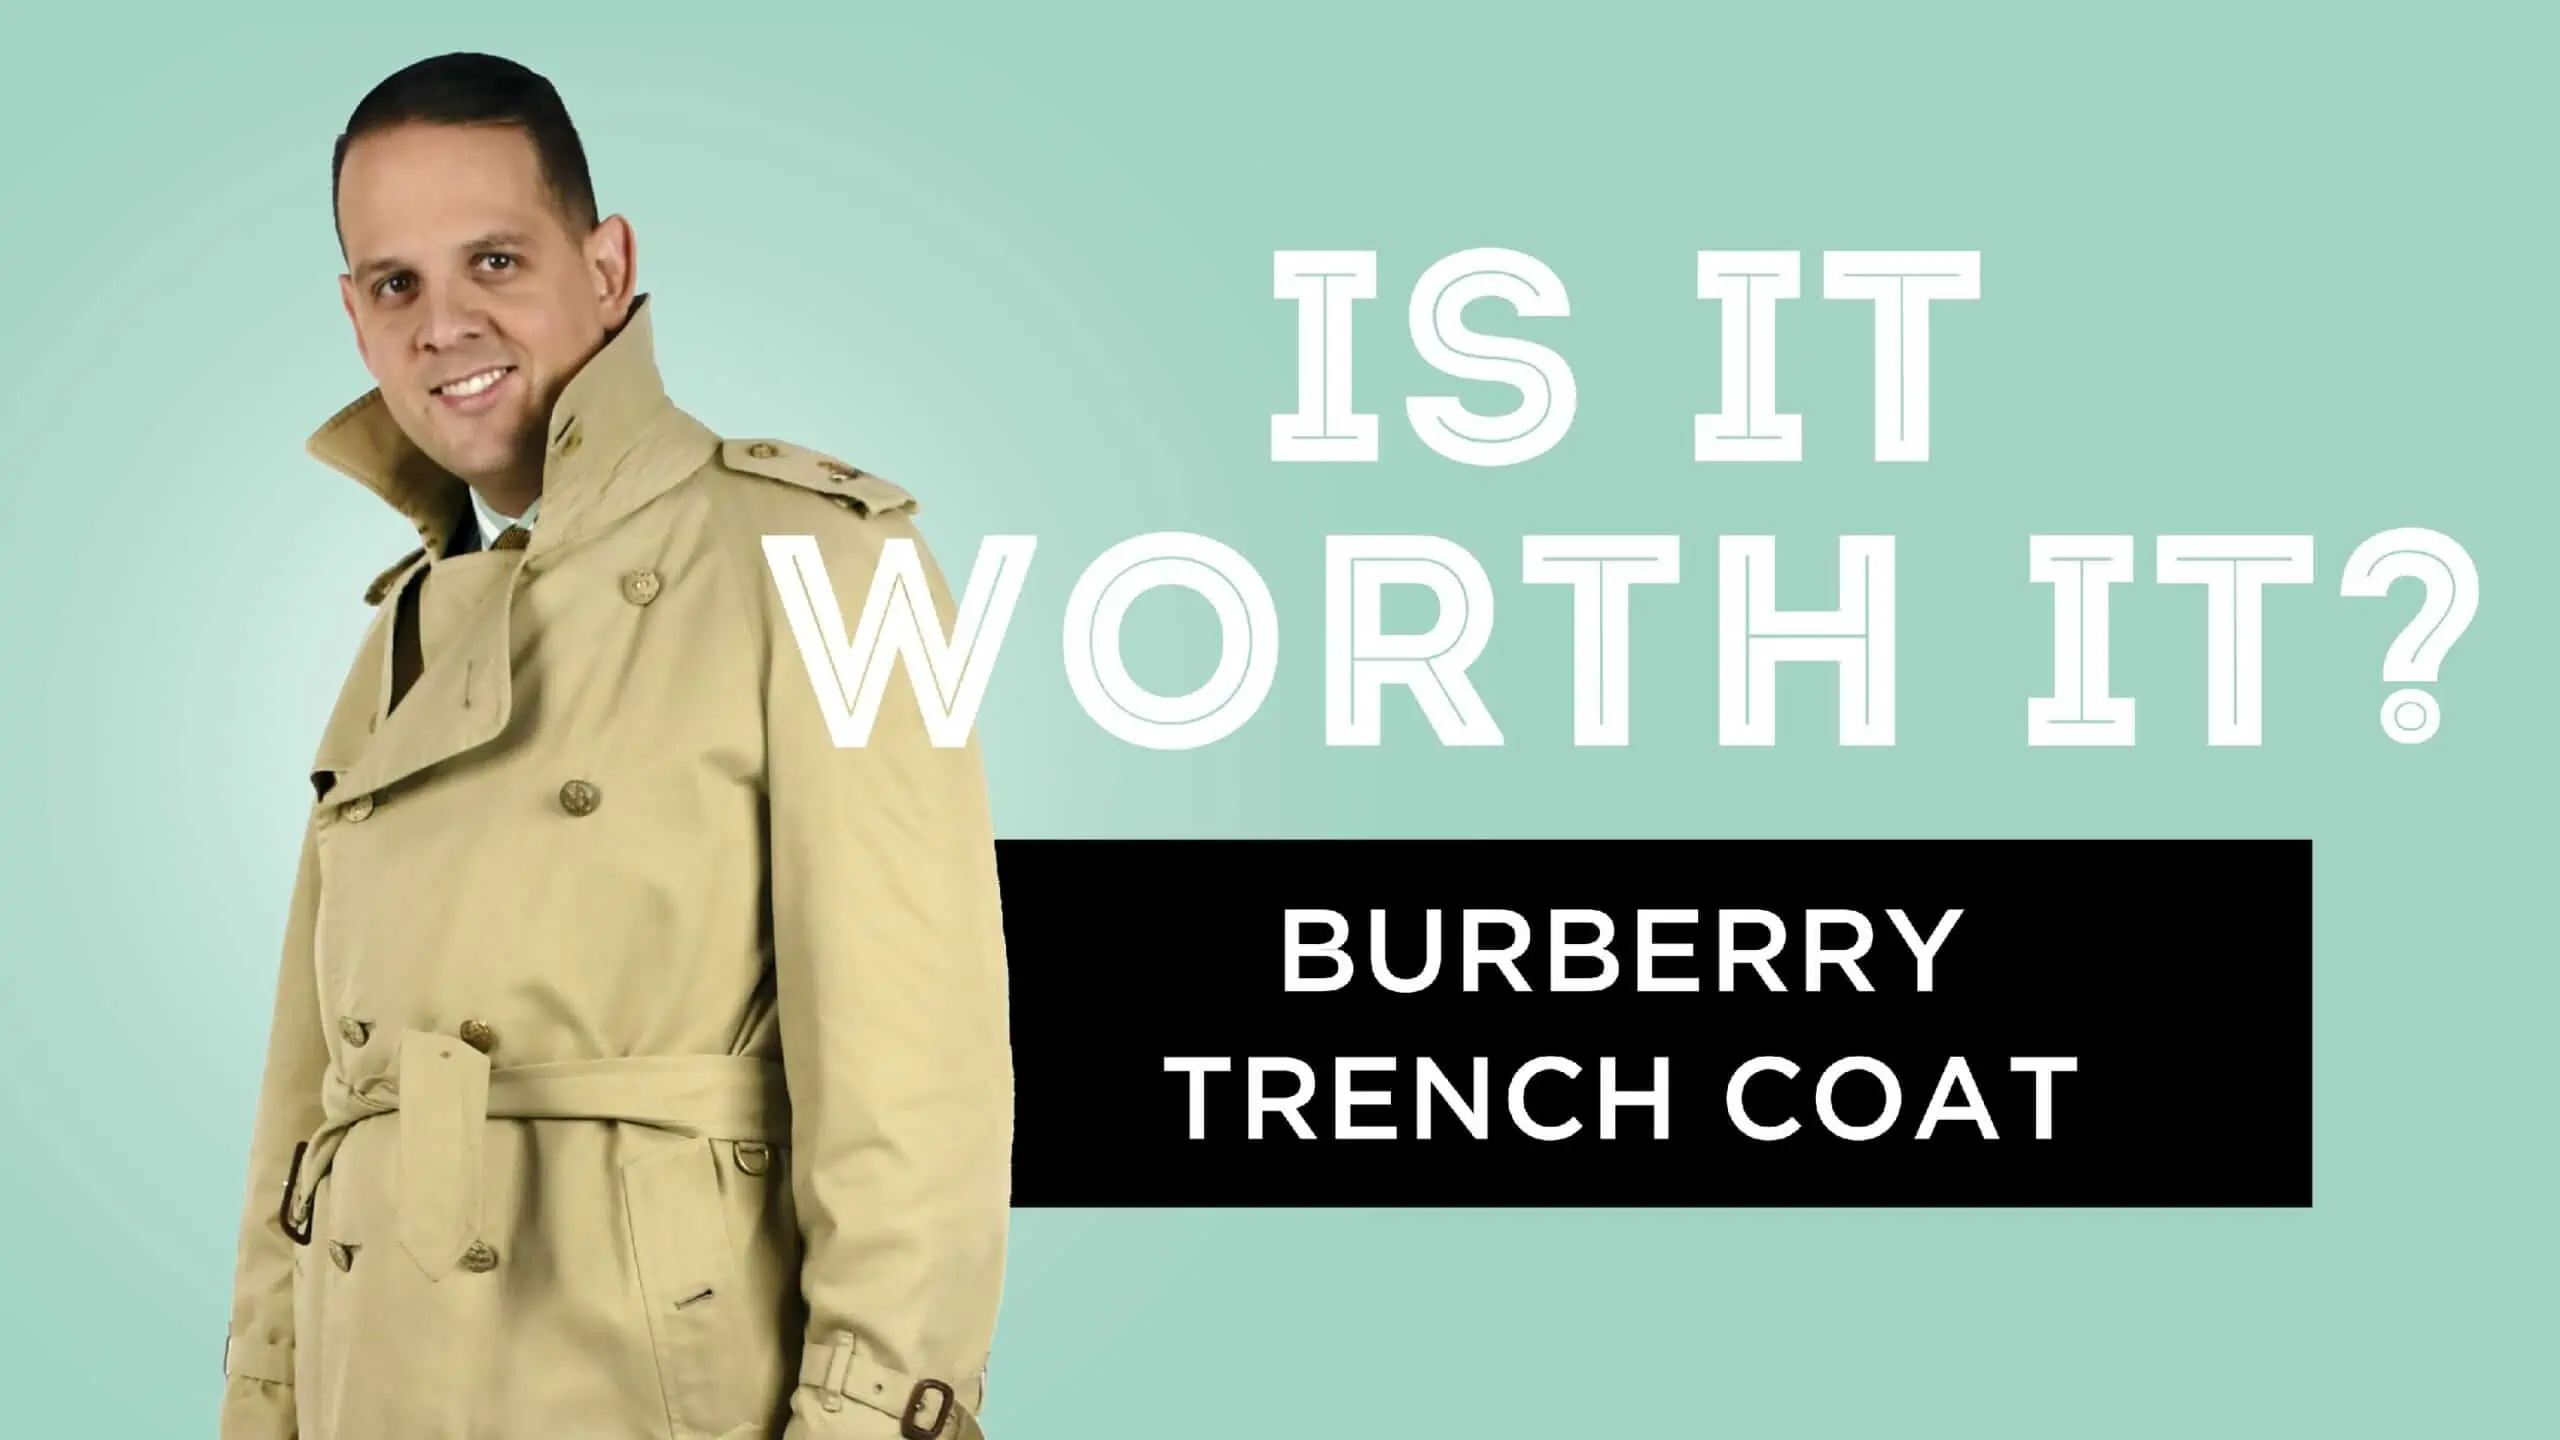 produktion fange ligegyldighed Is It Worth It? The Burberry Trench Coat